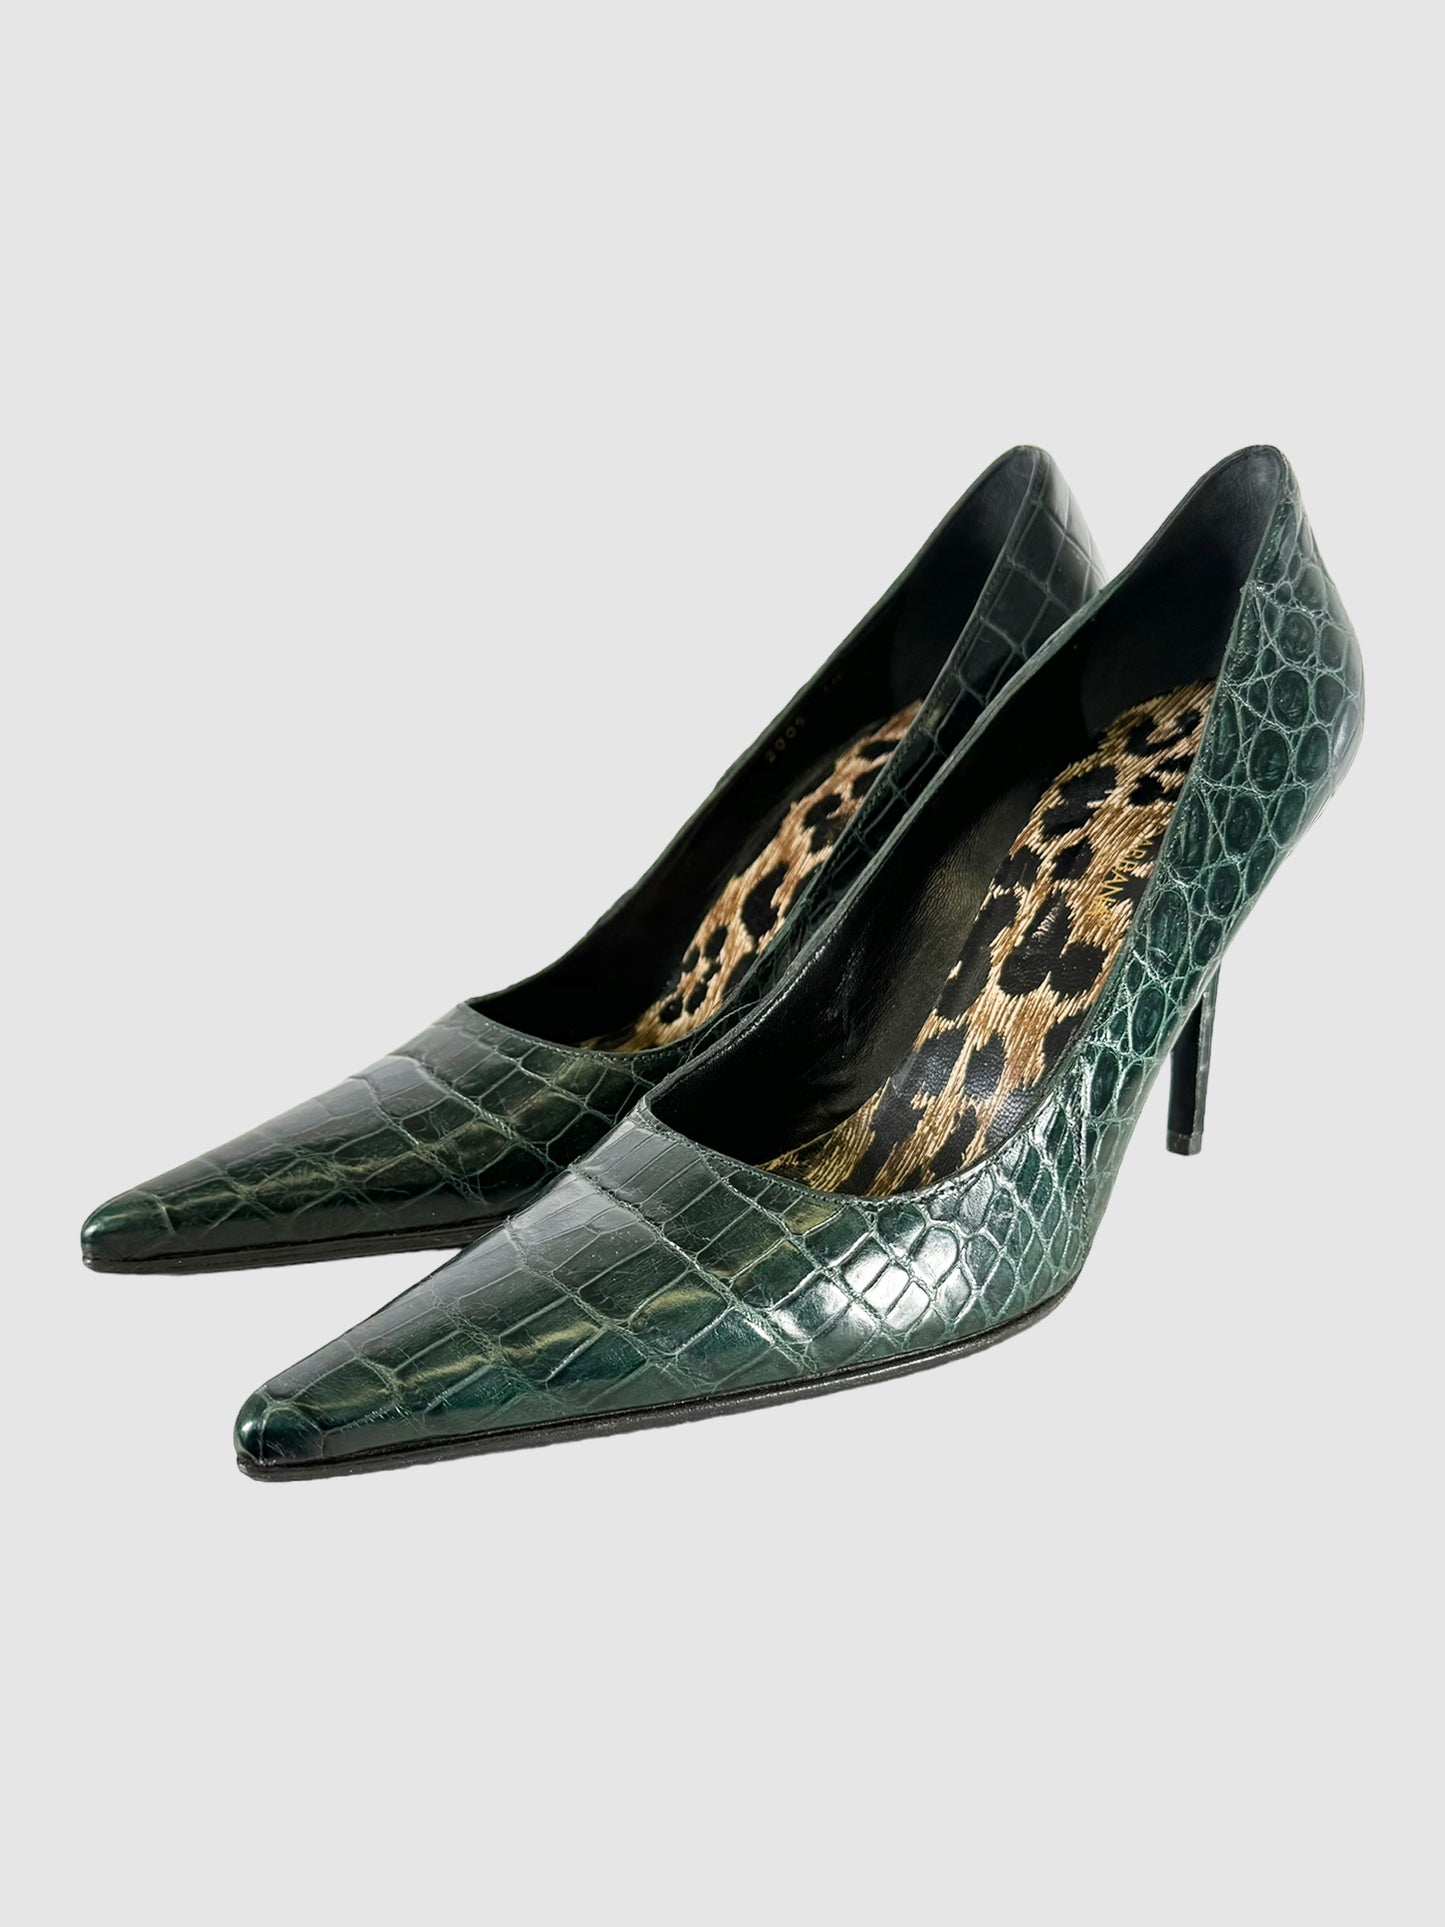 Croc Embossed Leather Pumps - Size 40